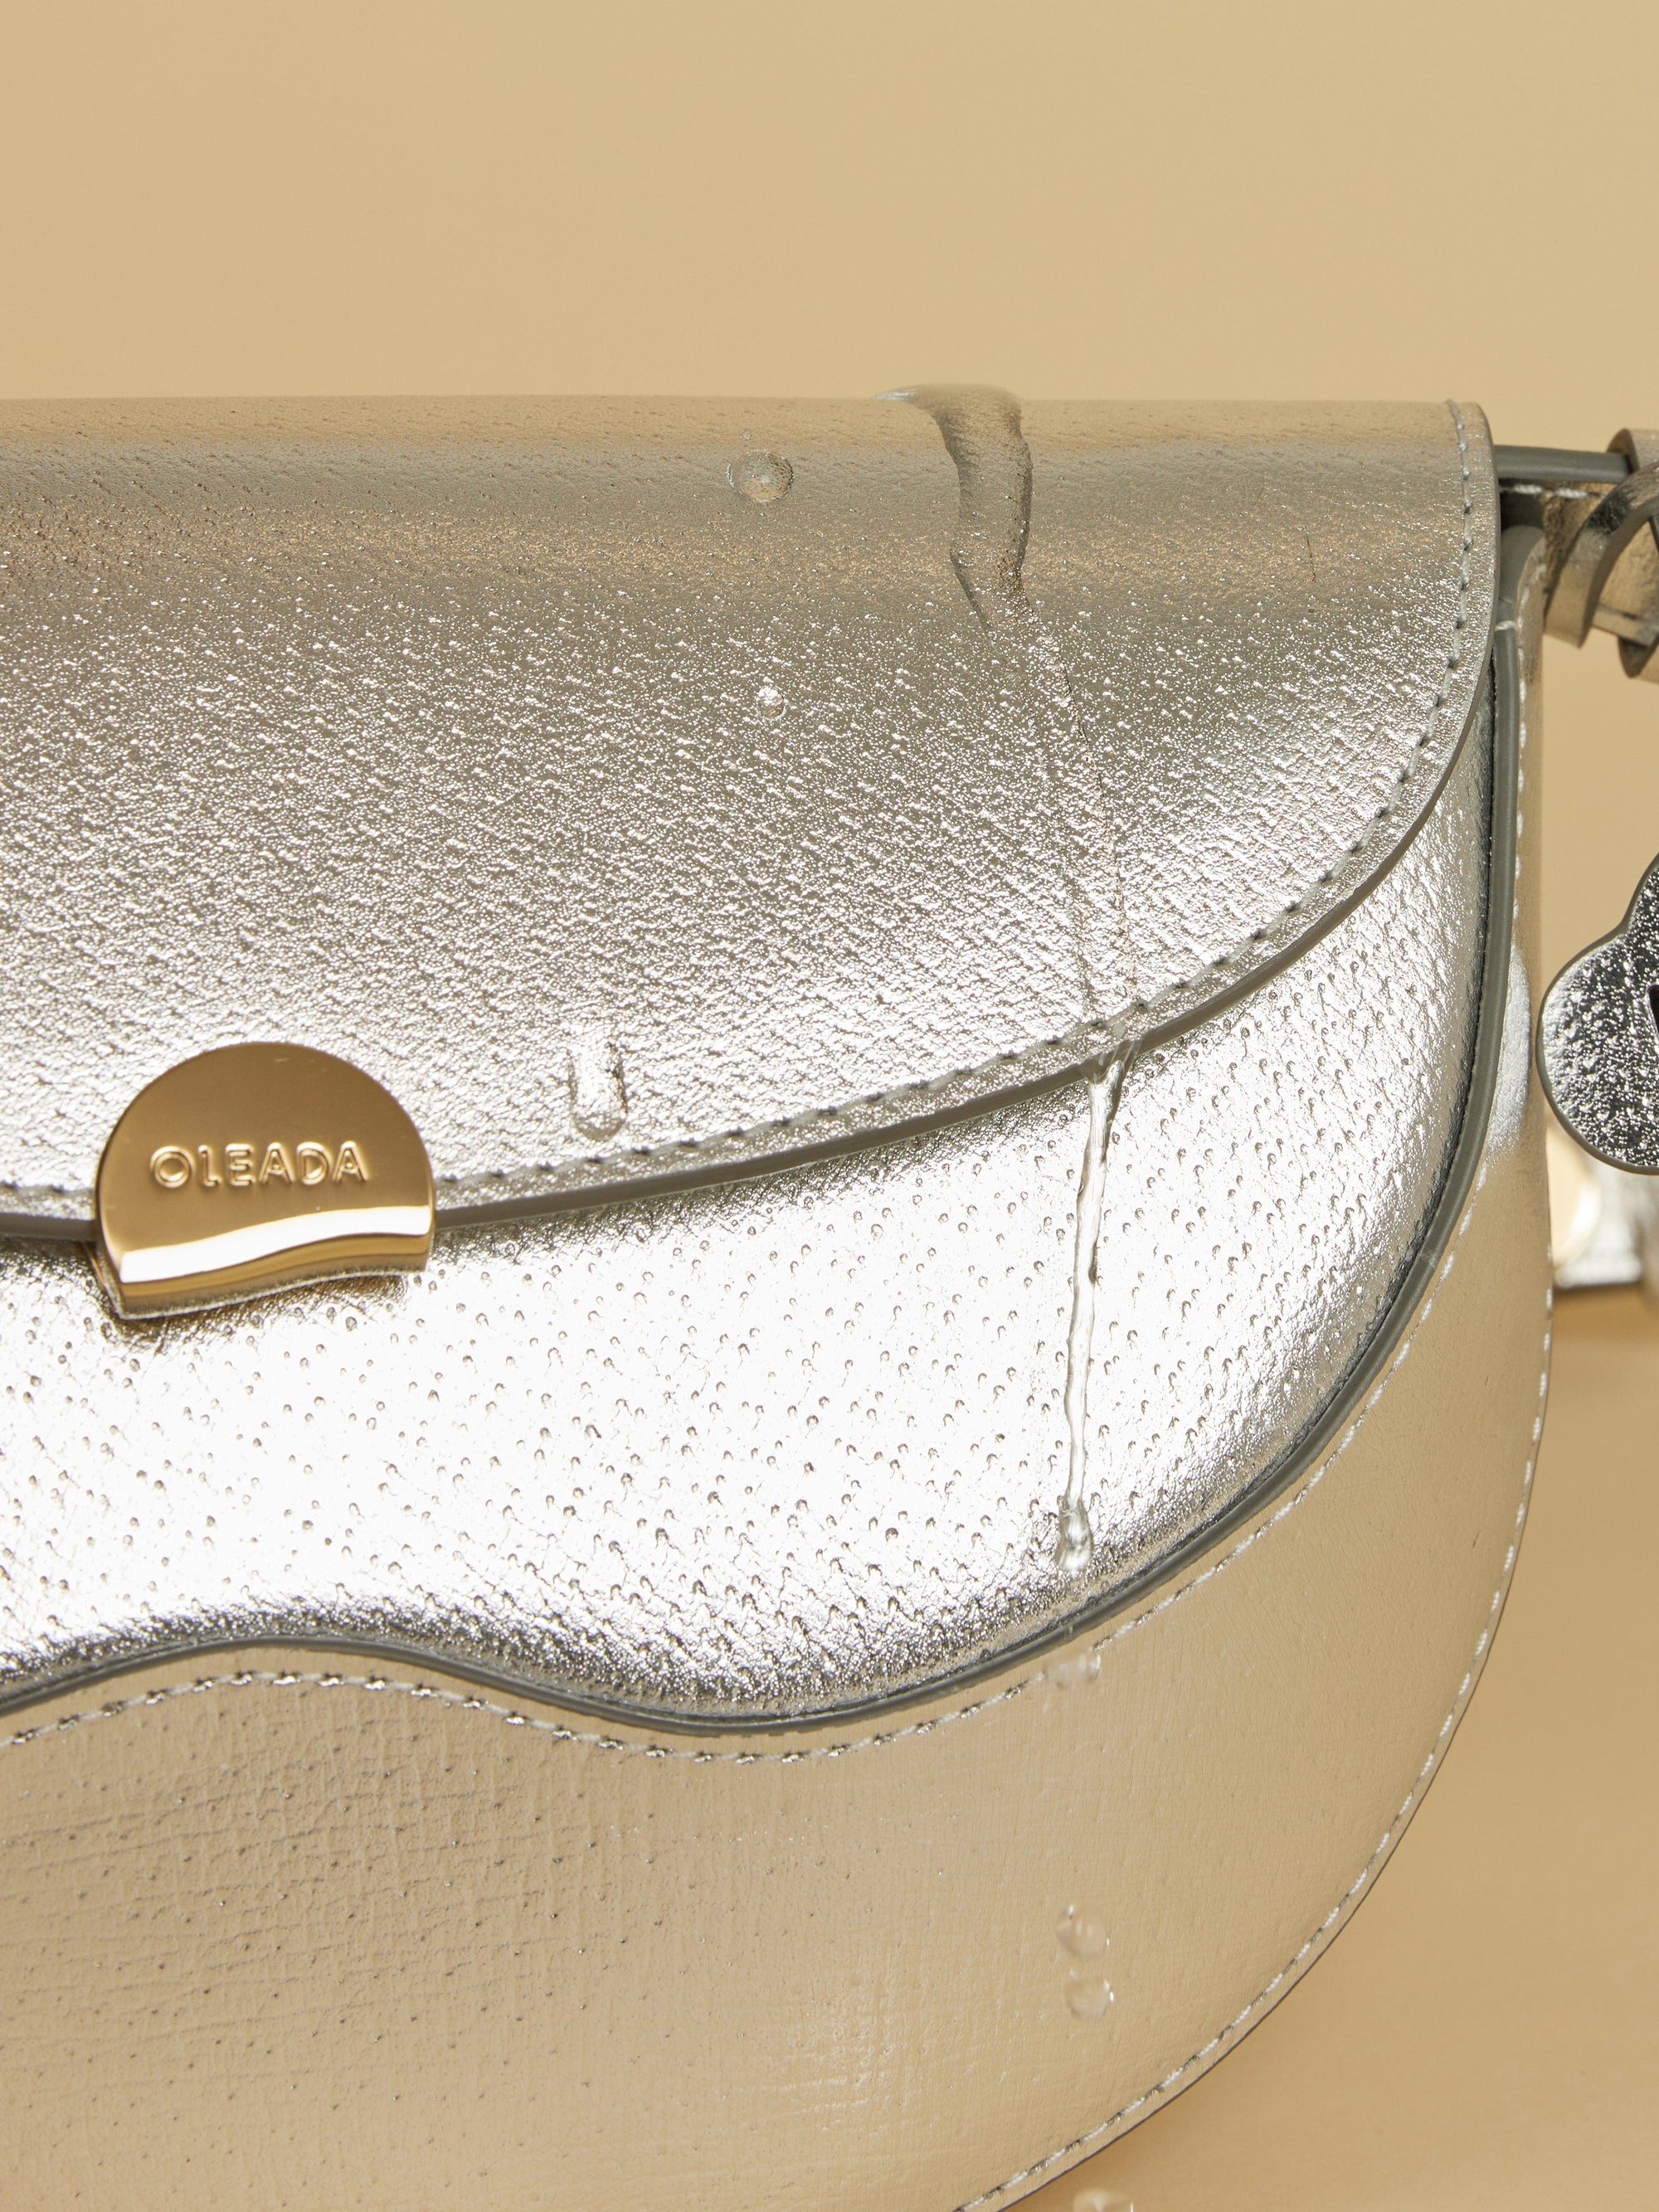 OLEADA Official Special From Boardroom To Ballroom - Echo Bag Plus - Maye Musk Limited Edition